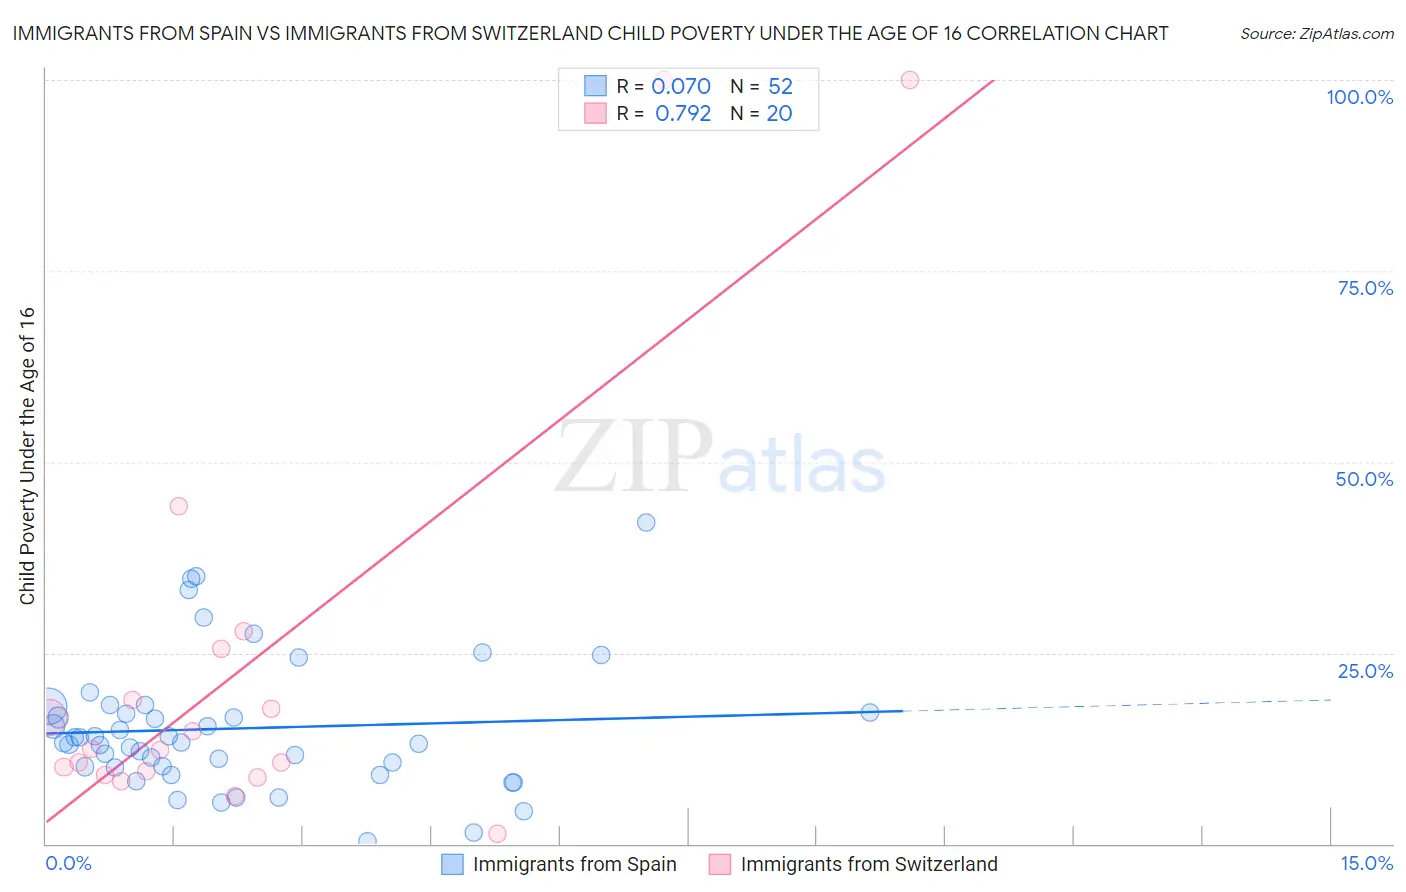 Immigrants from Spain vs Immigrants from Switzerland Child Poverty Under the Age of 16